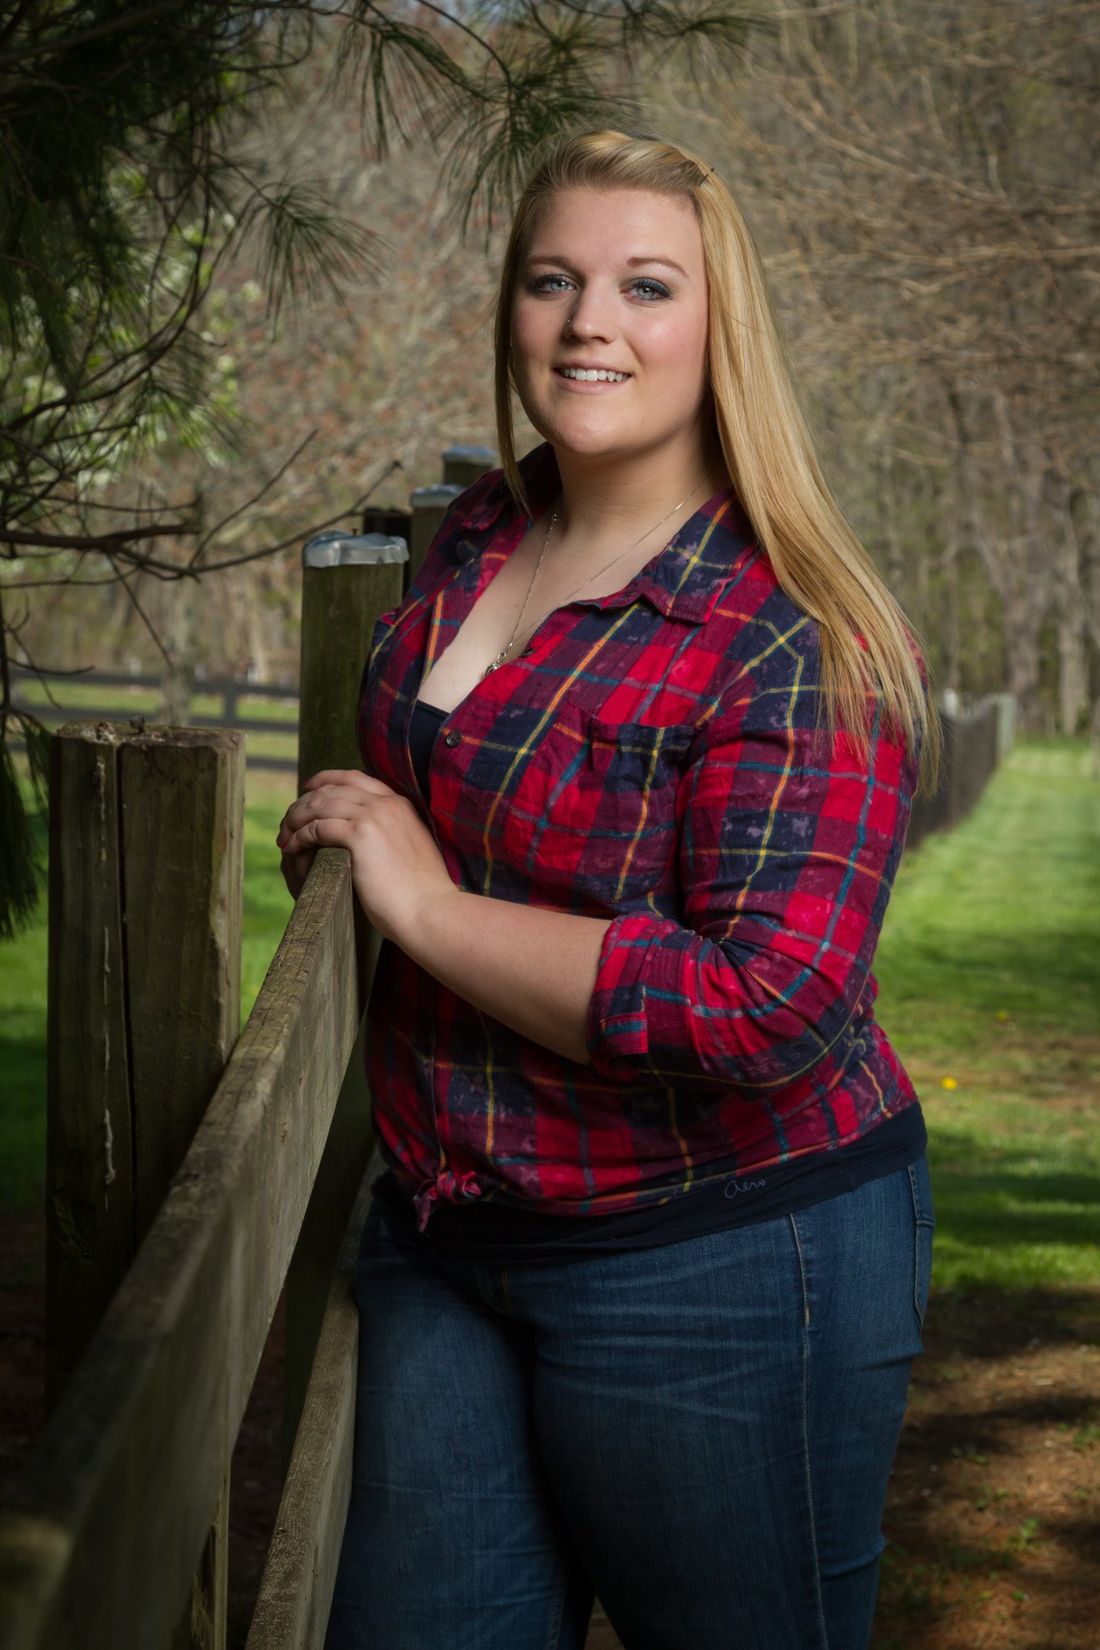 An outdoor senior portrait of a girl in a red plaid standing along a wooden fence